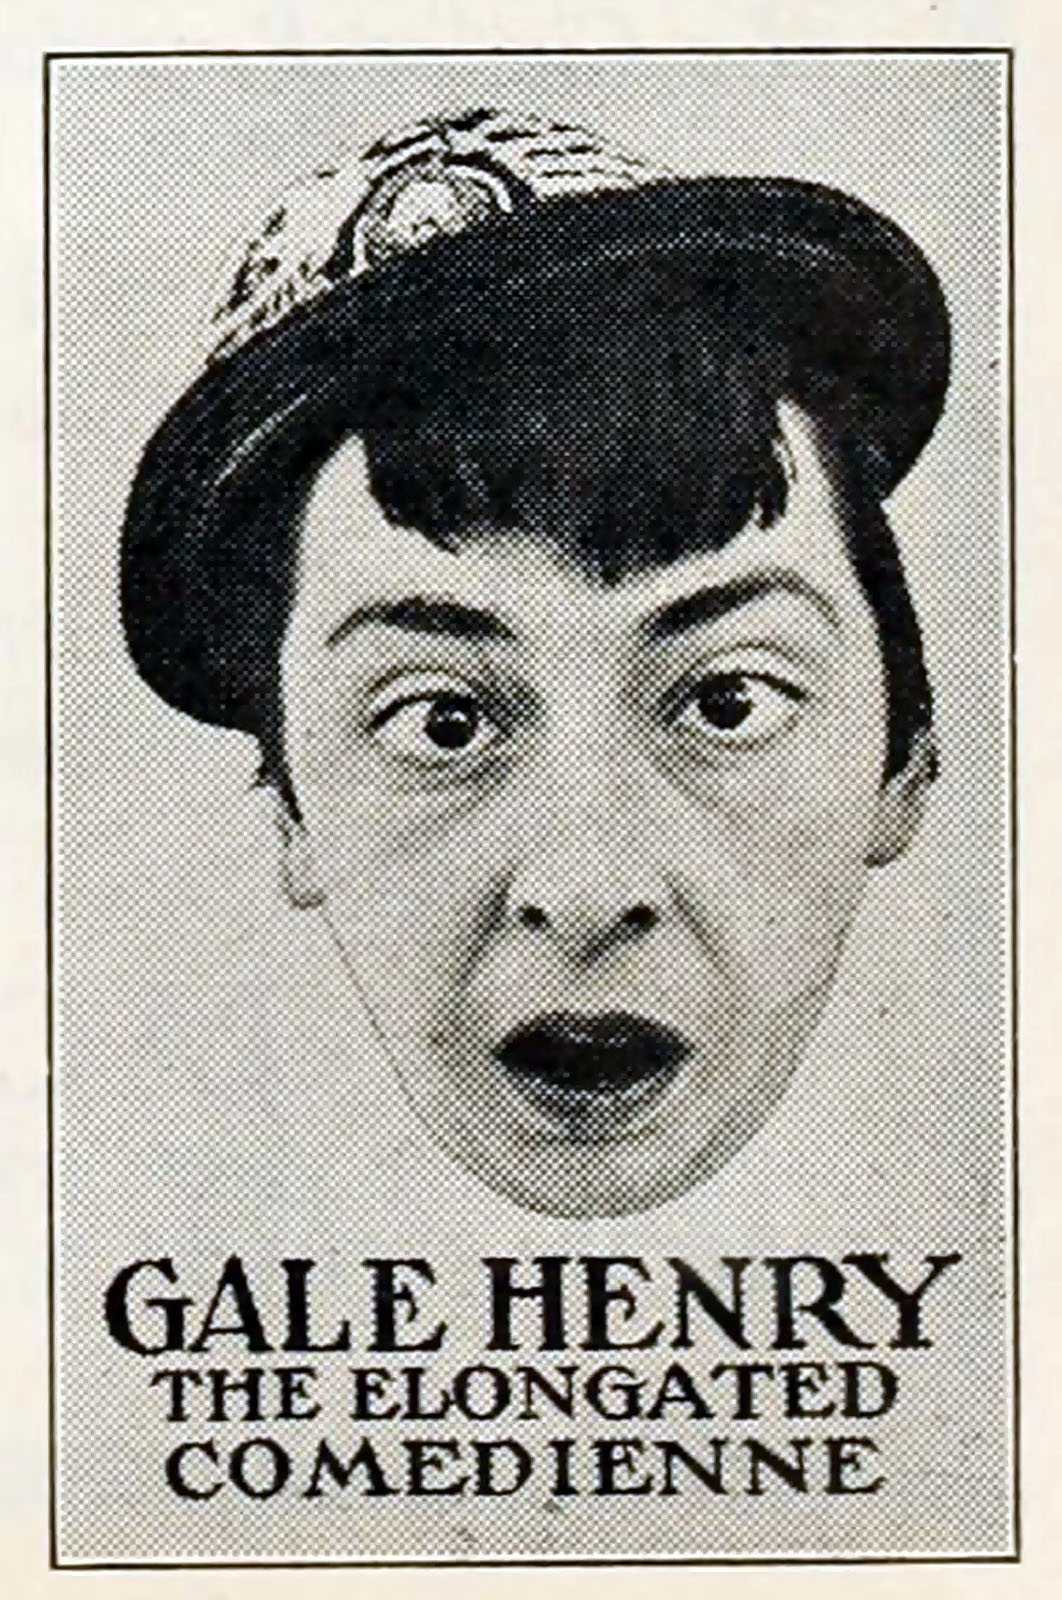 Gale Henry